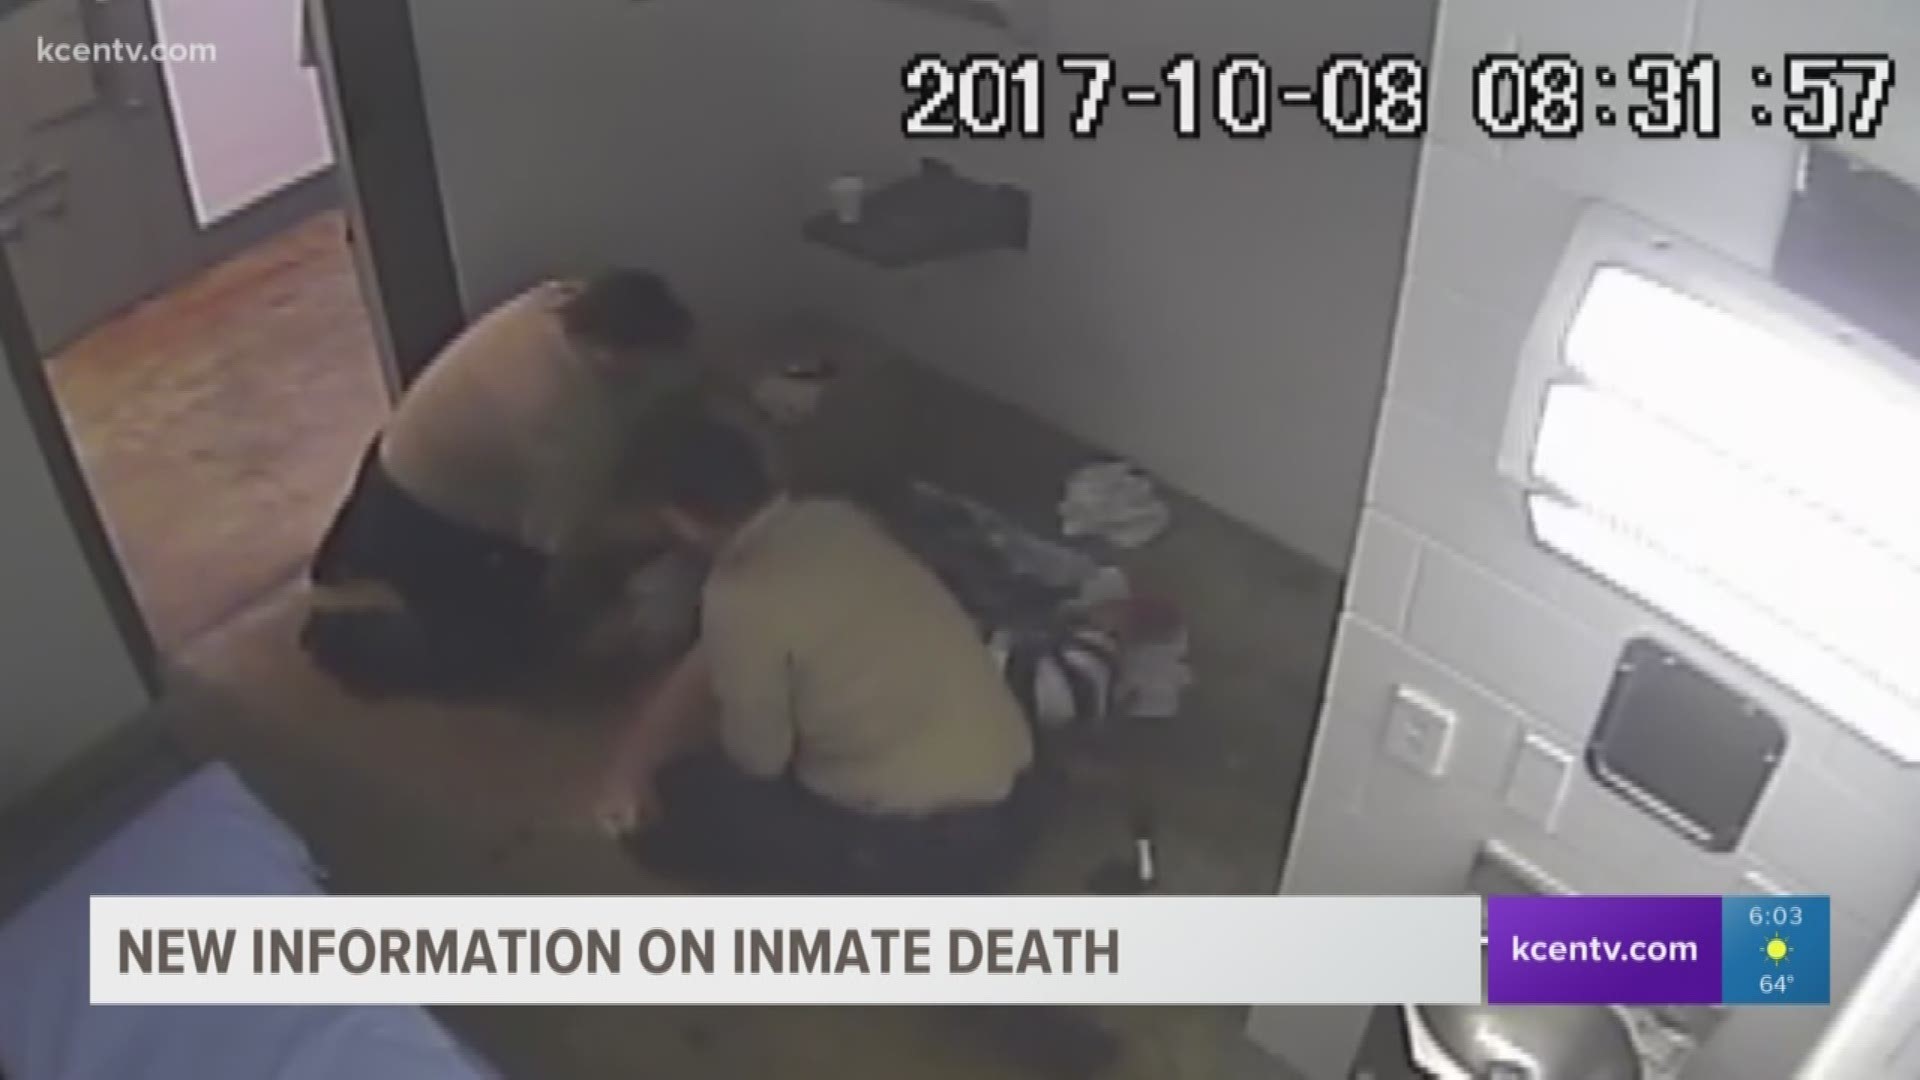 KCEN Channel 6 obtained an inquest about Kelli Page's death, and the Texas Ranger that investigated the case said the jailers followed protocol when it came to the use of force against the inmate.